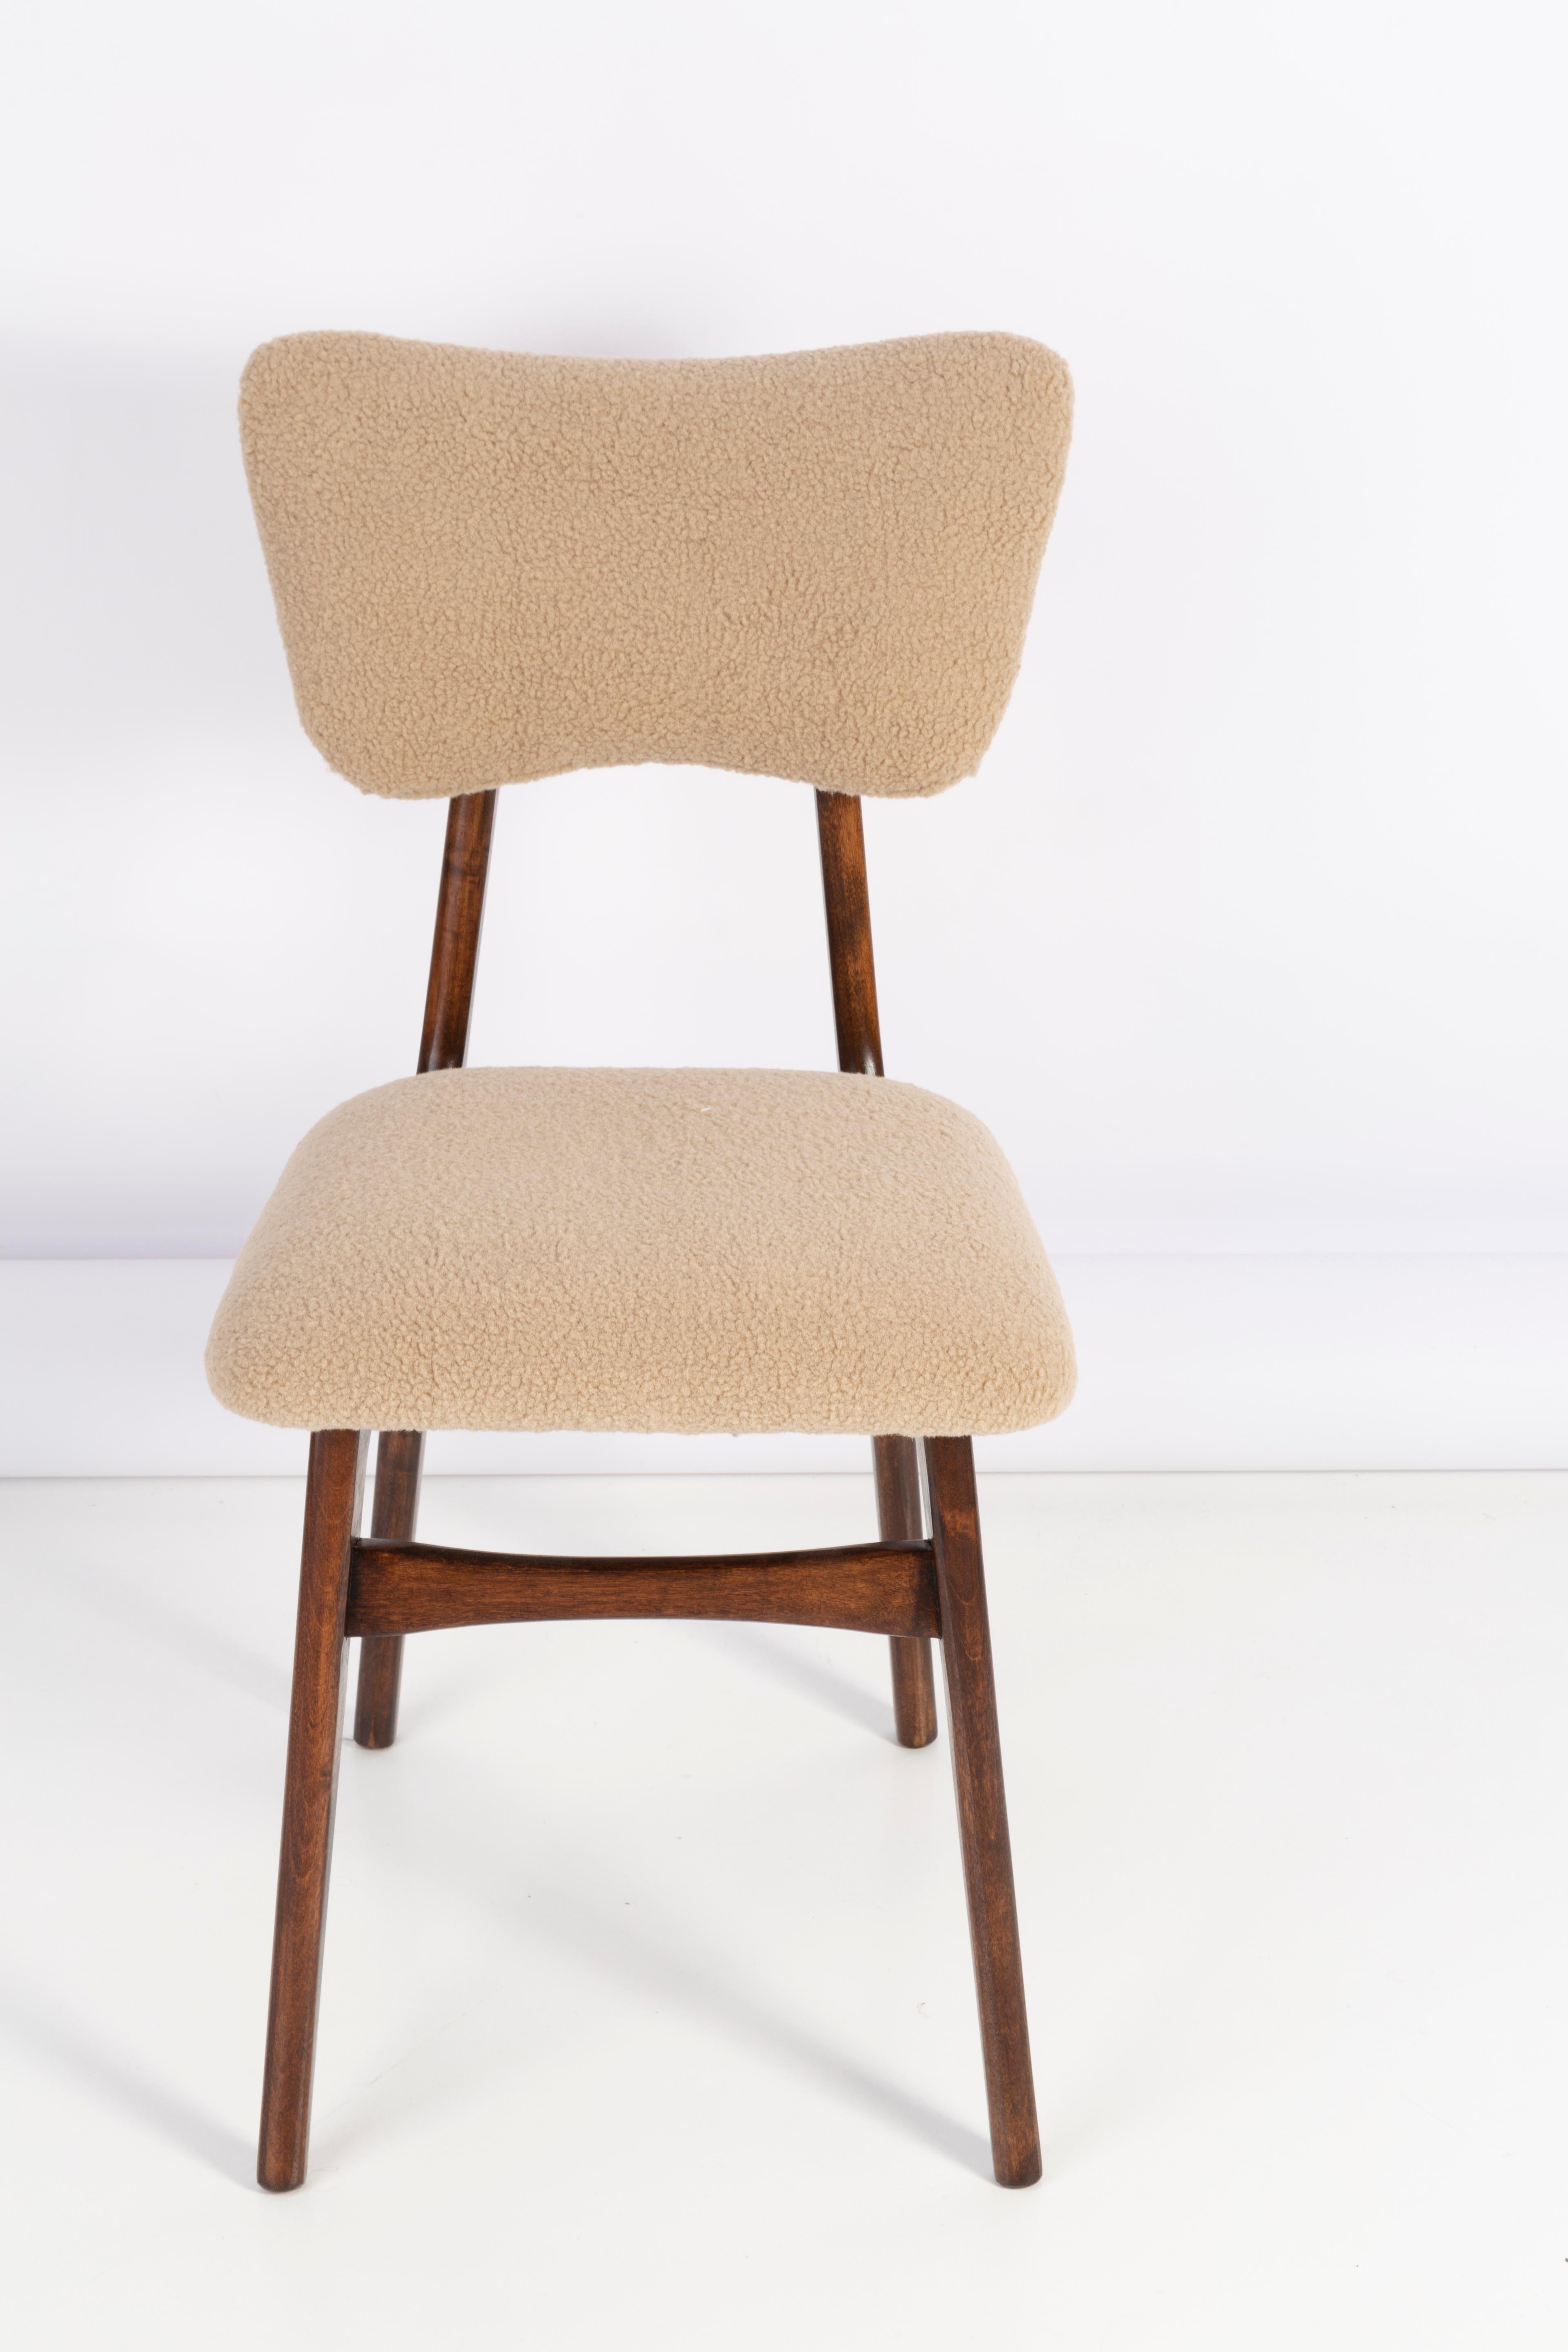 Set of Four 20th Century Camel Boucle Chairs, 1960s For Sale 8